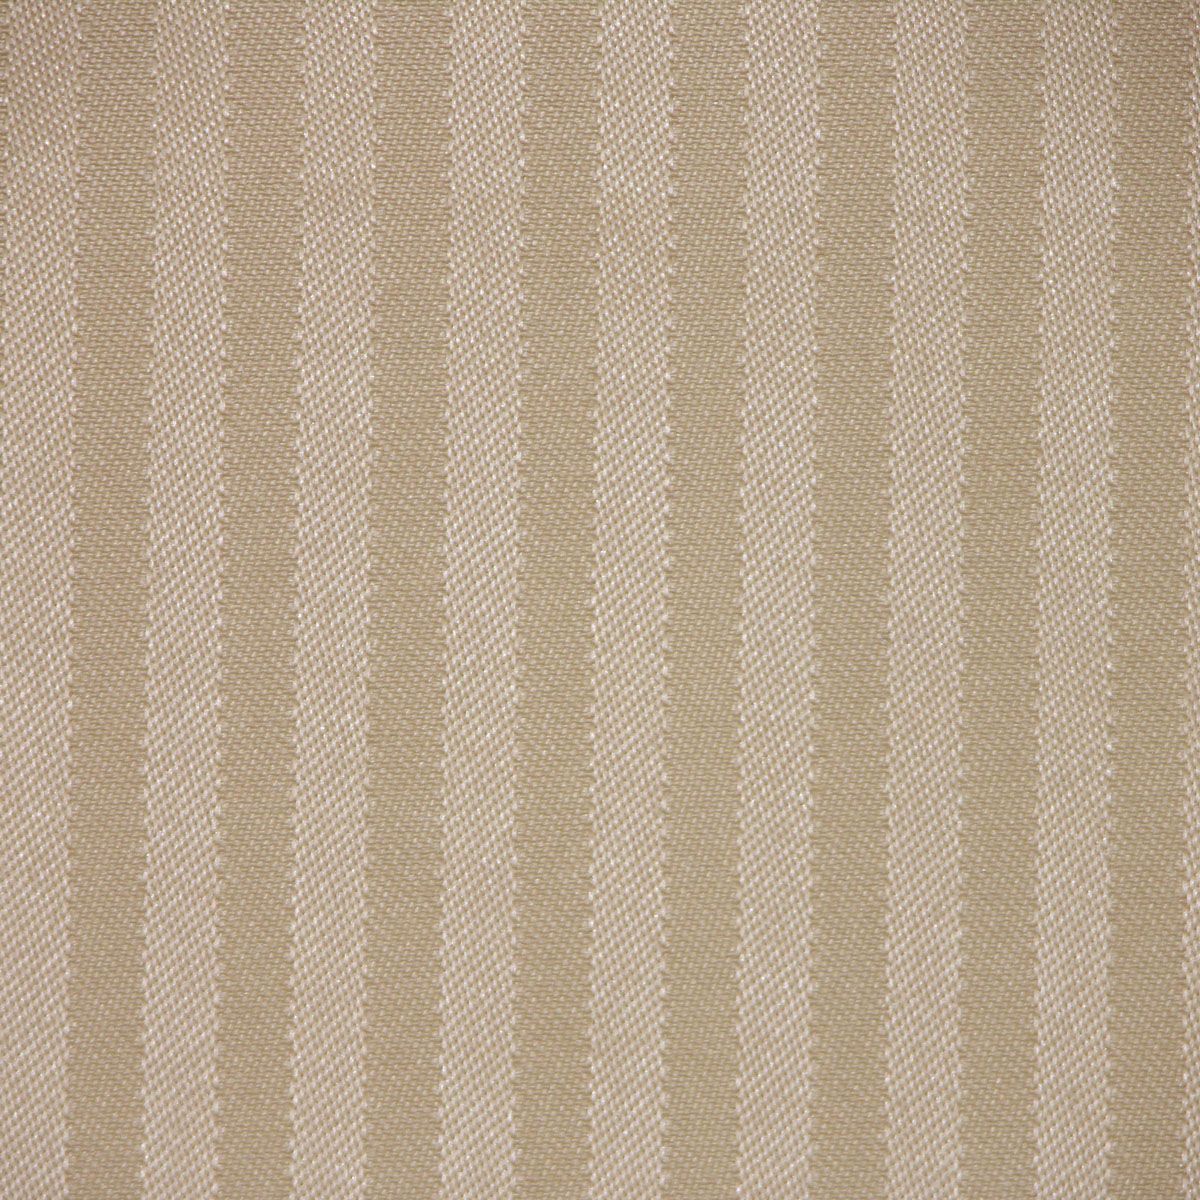 Davenport fabric in driftwood color - pattern number WR 54622244 - by Scalamandre in the Old World Weavers collection